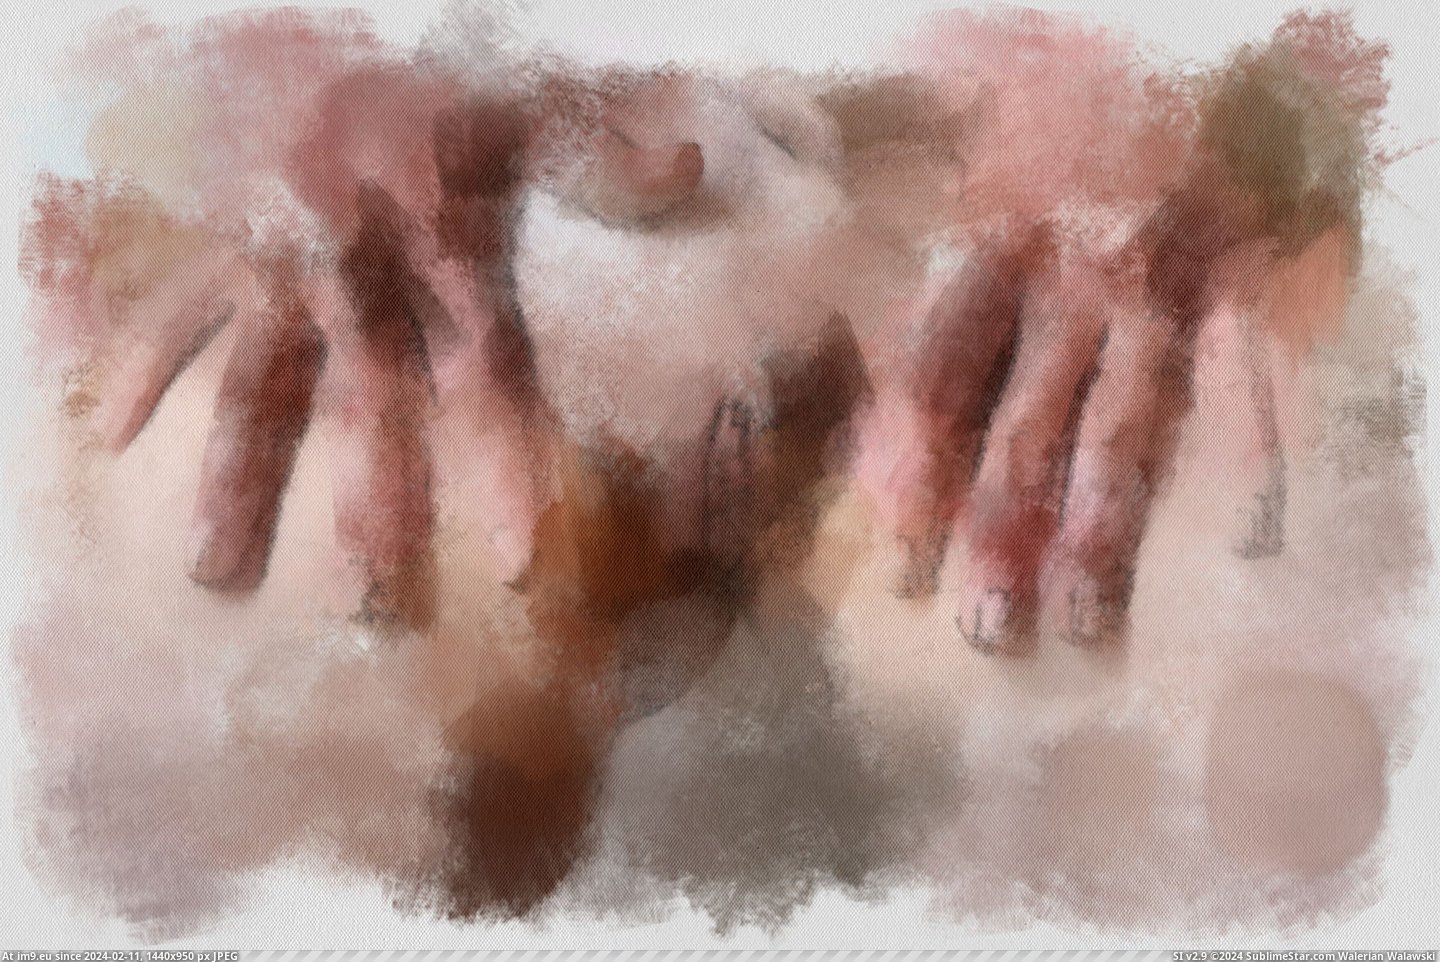  #2400x1596  !lilu_Aquarell-3 Pic. (Image of album Adult fineart nude))